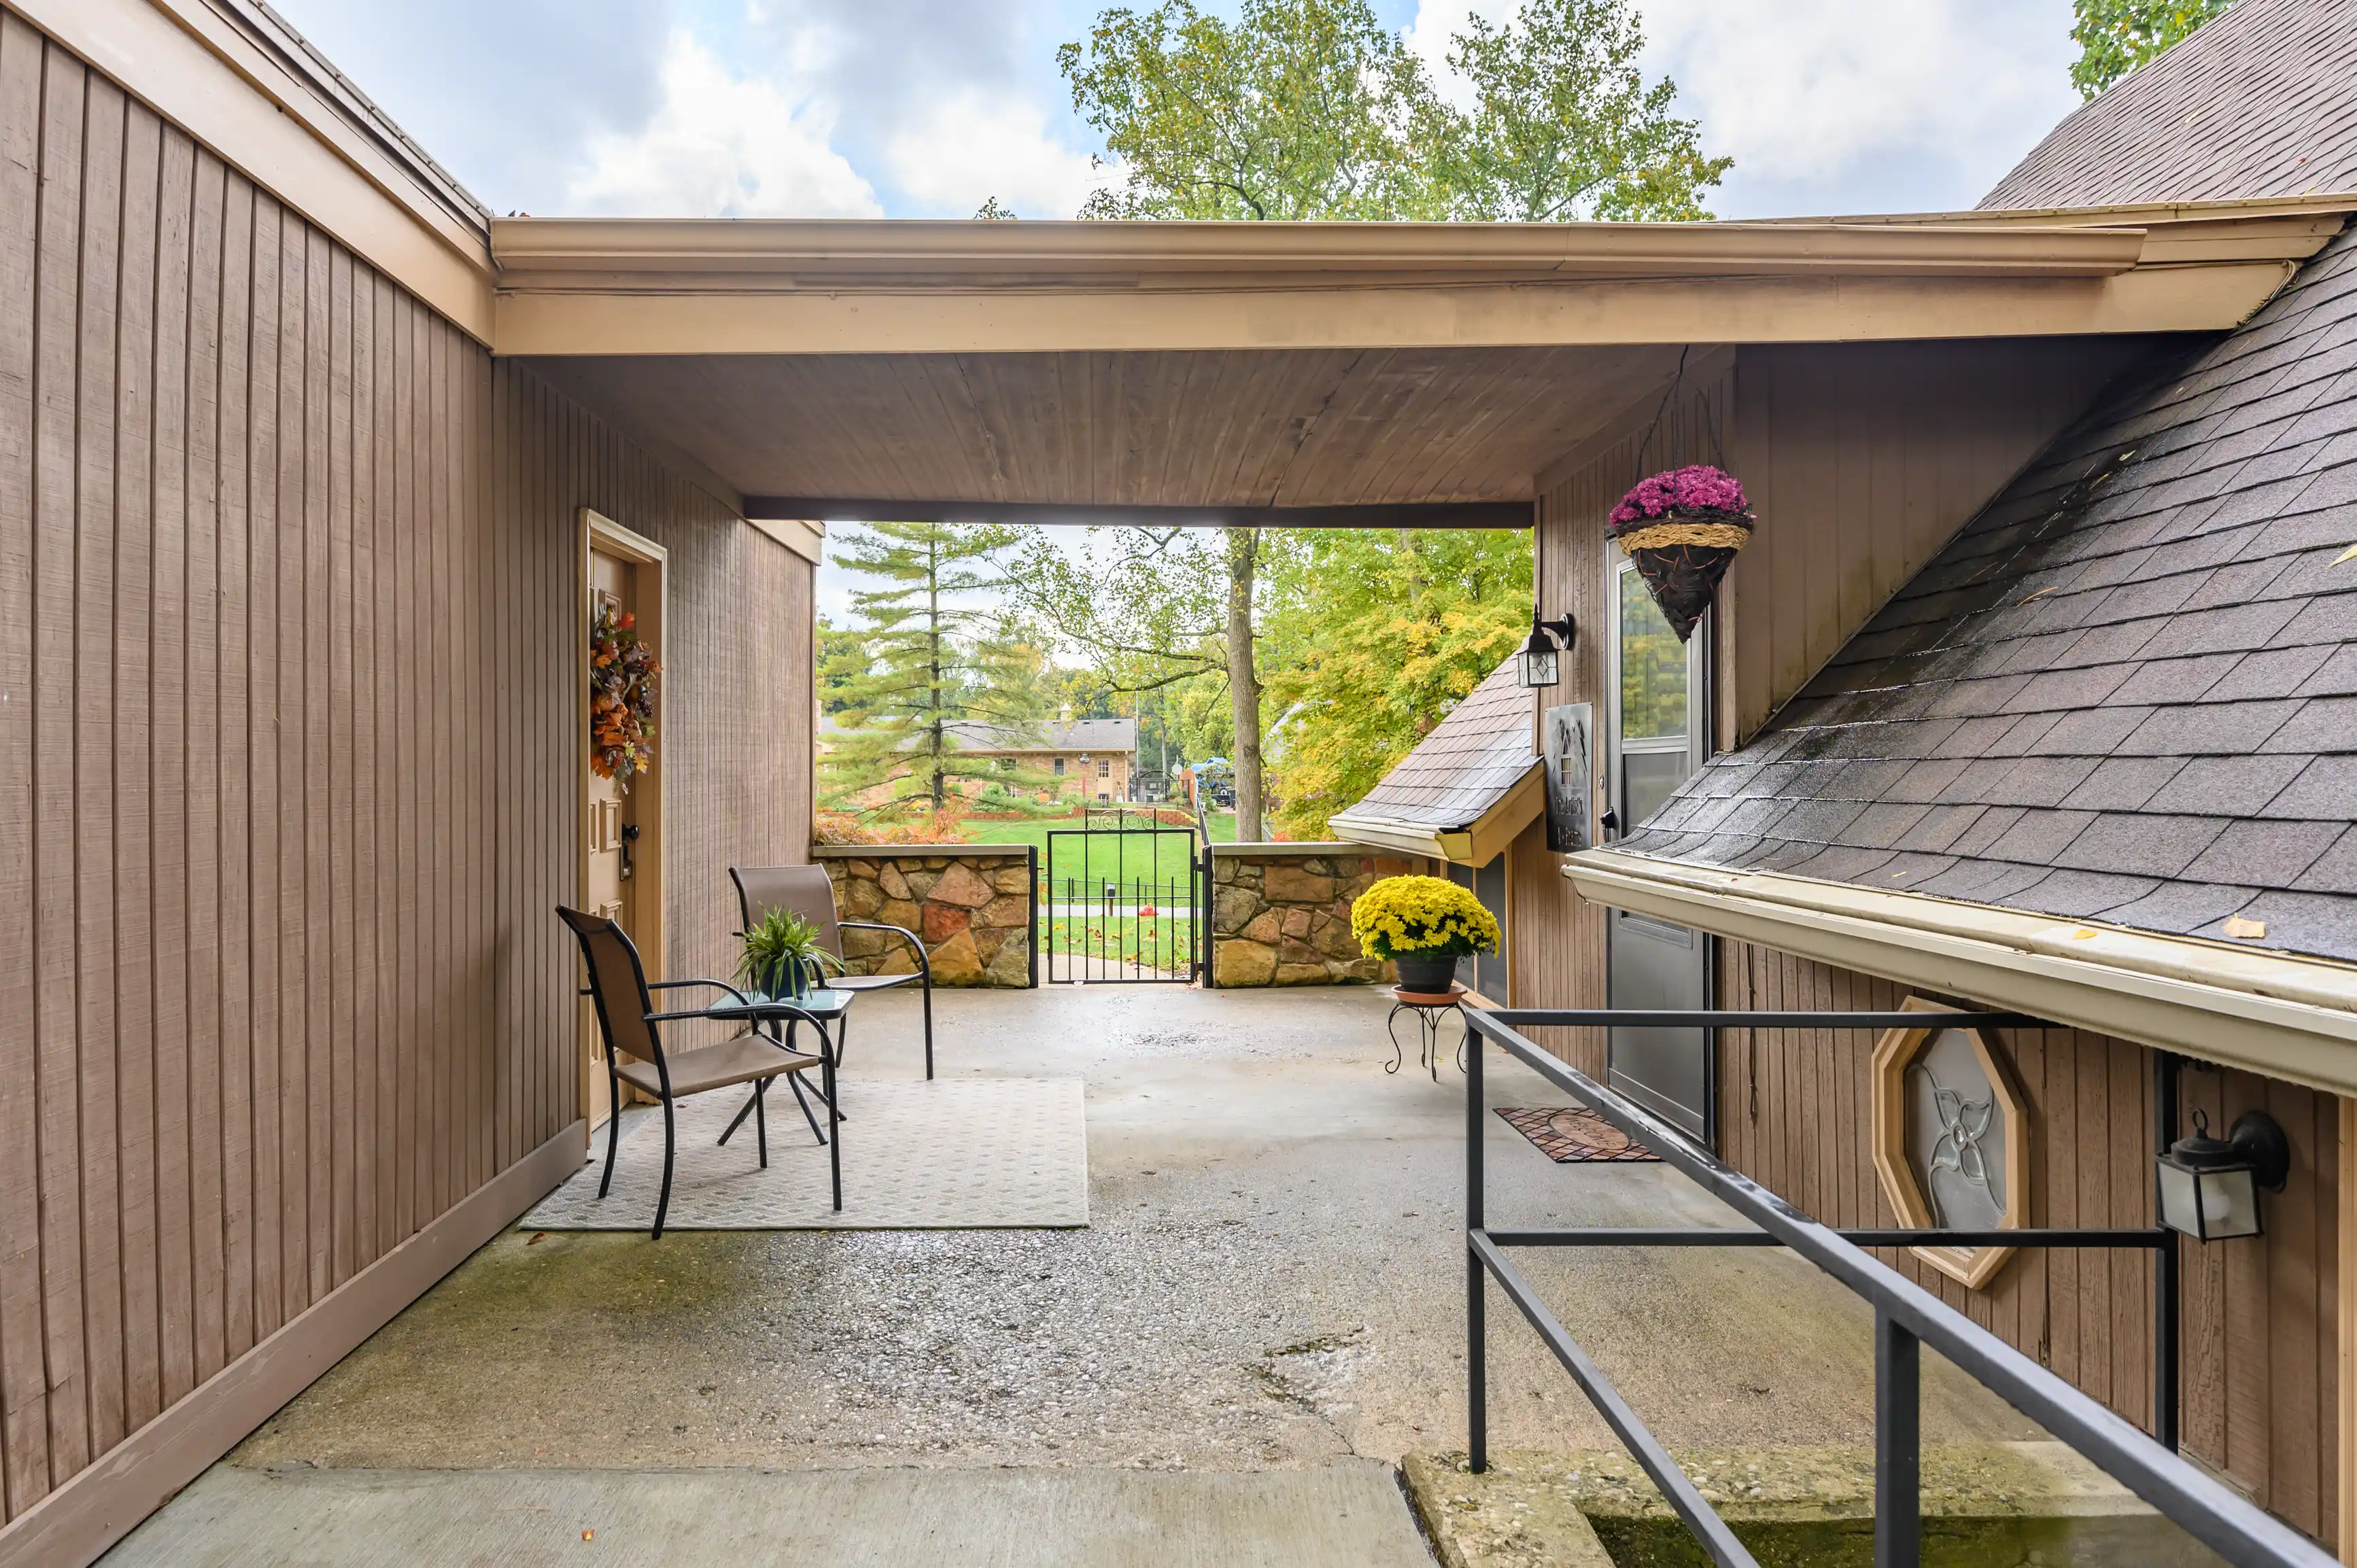 Covered carport area with a metal gate leading to a green lawn, adorned with hanging and potted flowers, and outdoor seating by the house door.